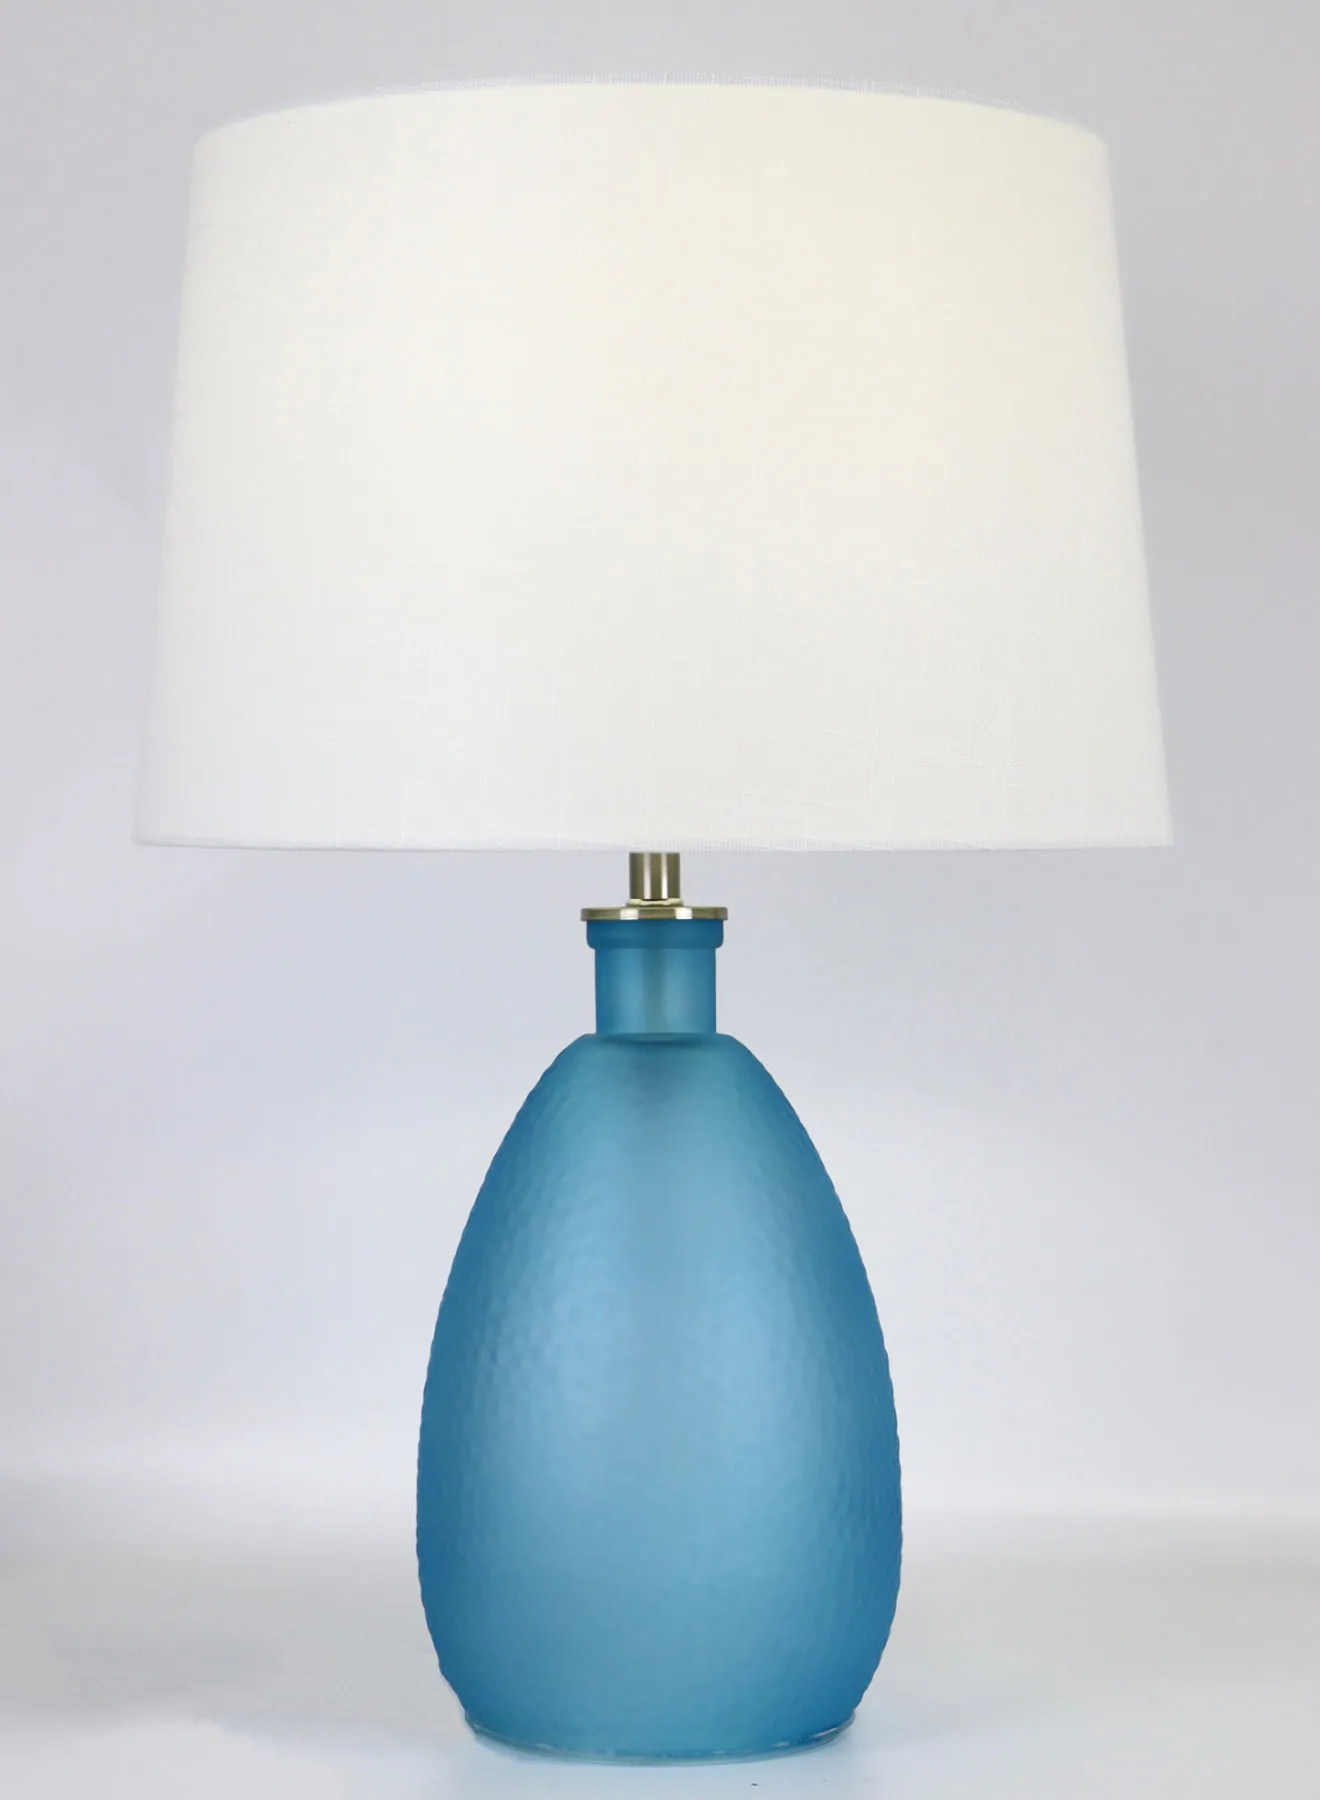 Switch Modern Design Glass Table Lamp Unique Luxury Quality Material for the Perfect Stylish Home RSN71024 Blue 15 x 22inch